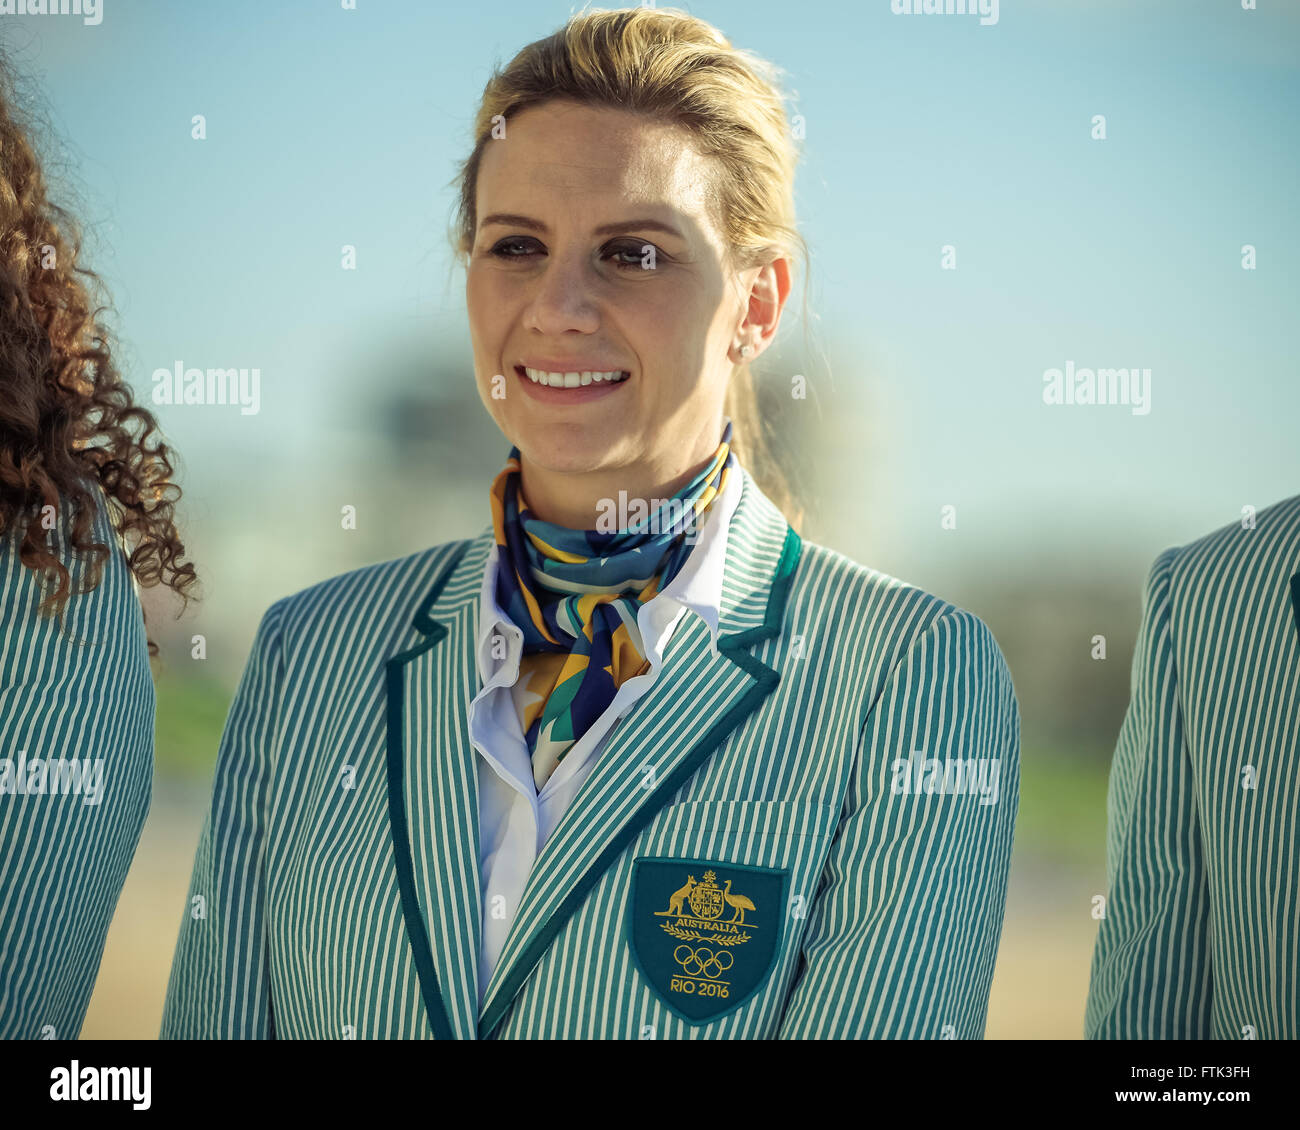 Sydney, Australia. 30th Mar, 2016. Penny Taylor, Women's Basketball olympic medalist poses in her Australian opening ceremony uniform during the 2016 Australian Olympic Team Uniform Official Launch on March 30, 2016 in Sydney, Australia. Credit:  Hugh Peterswald/Pacific Press/Alamy Live News Stock Photo